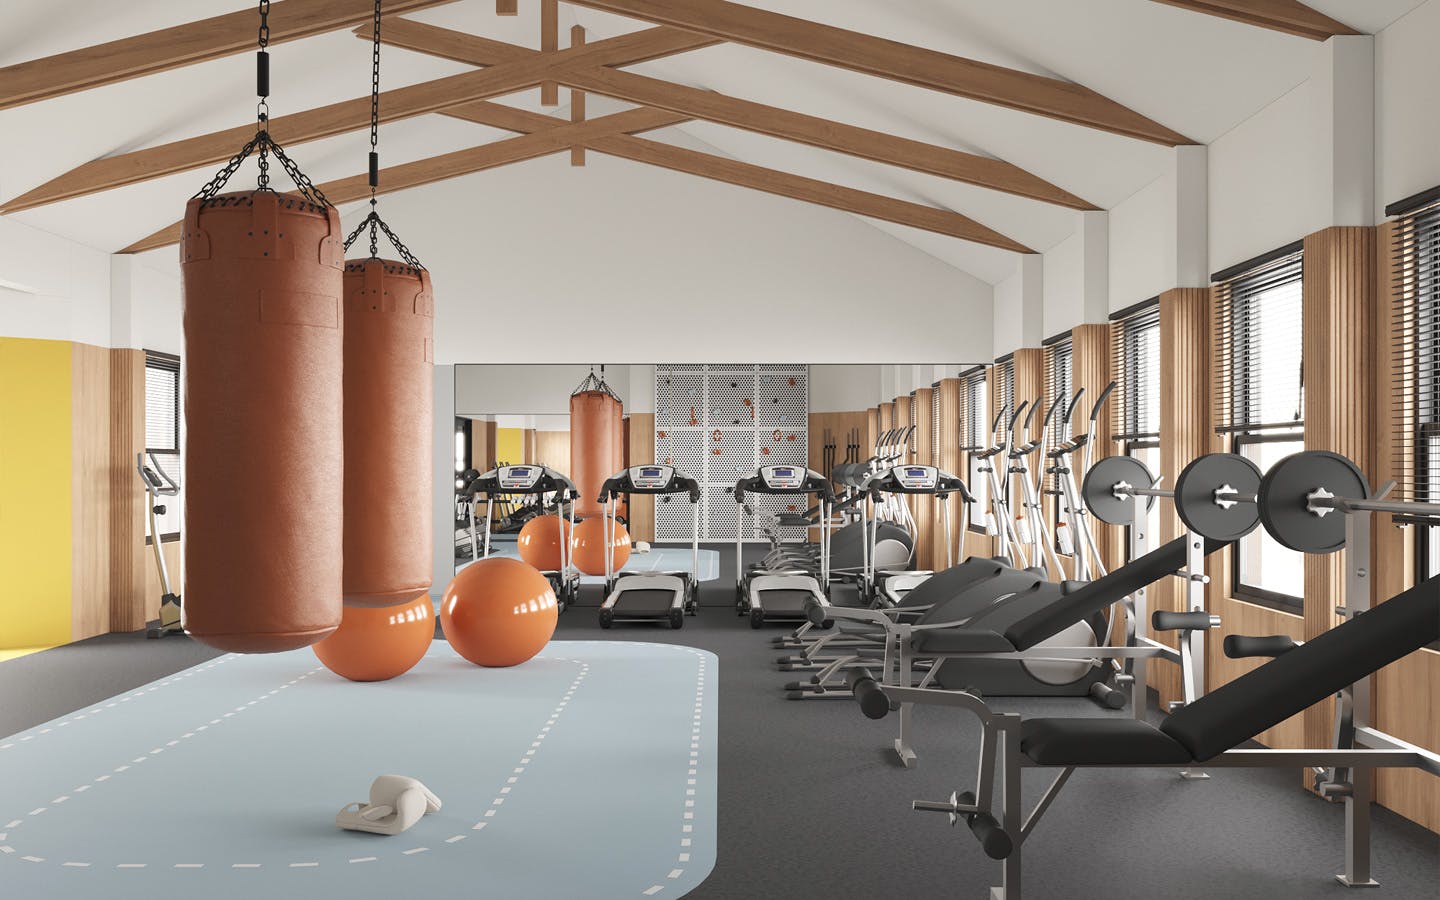 Elevate your workout routine with our brand new, fully equipped fitness center.